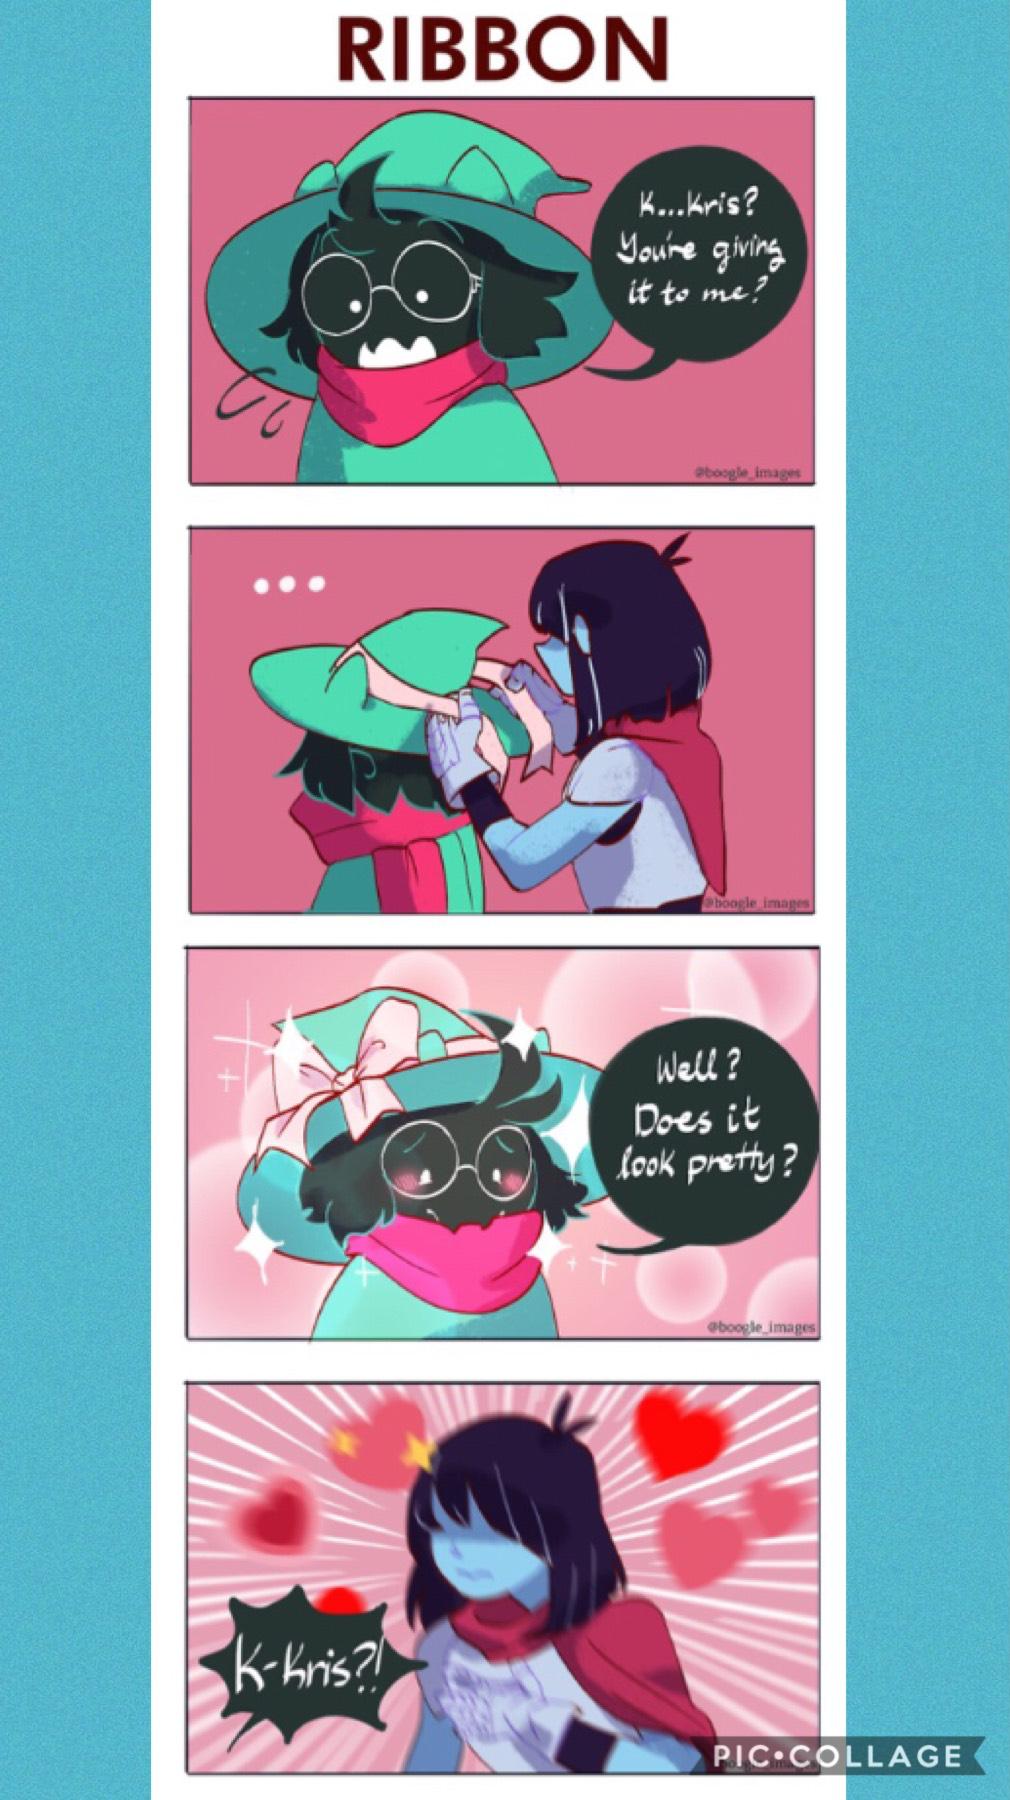 Kris x Ralsei (I think this is probably my favorite Deltarune ship so far)